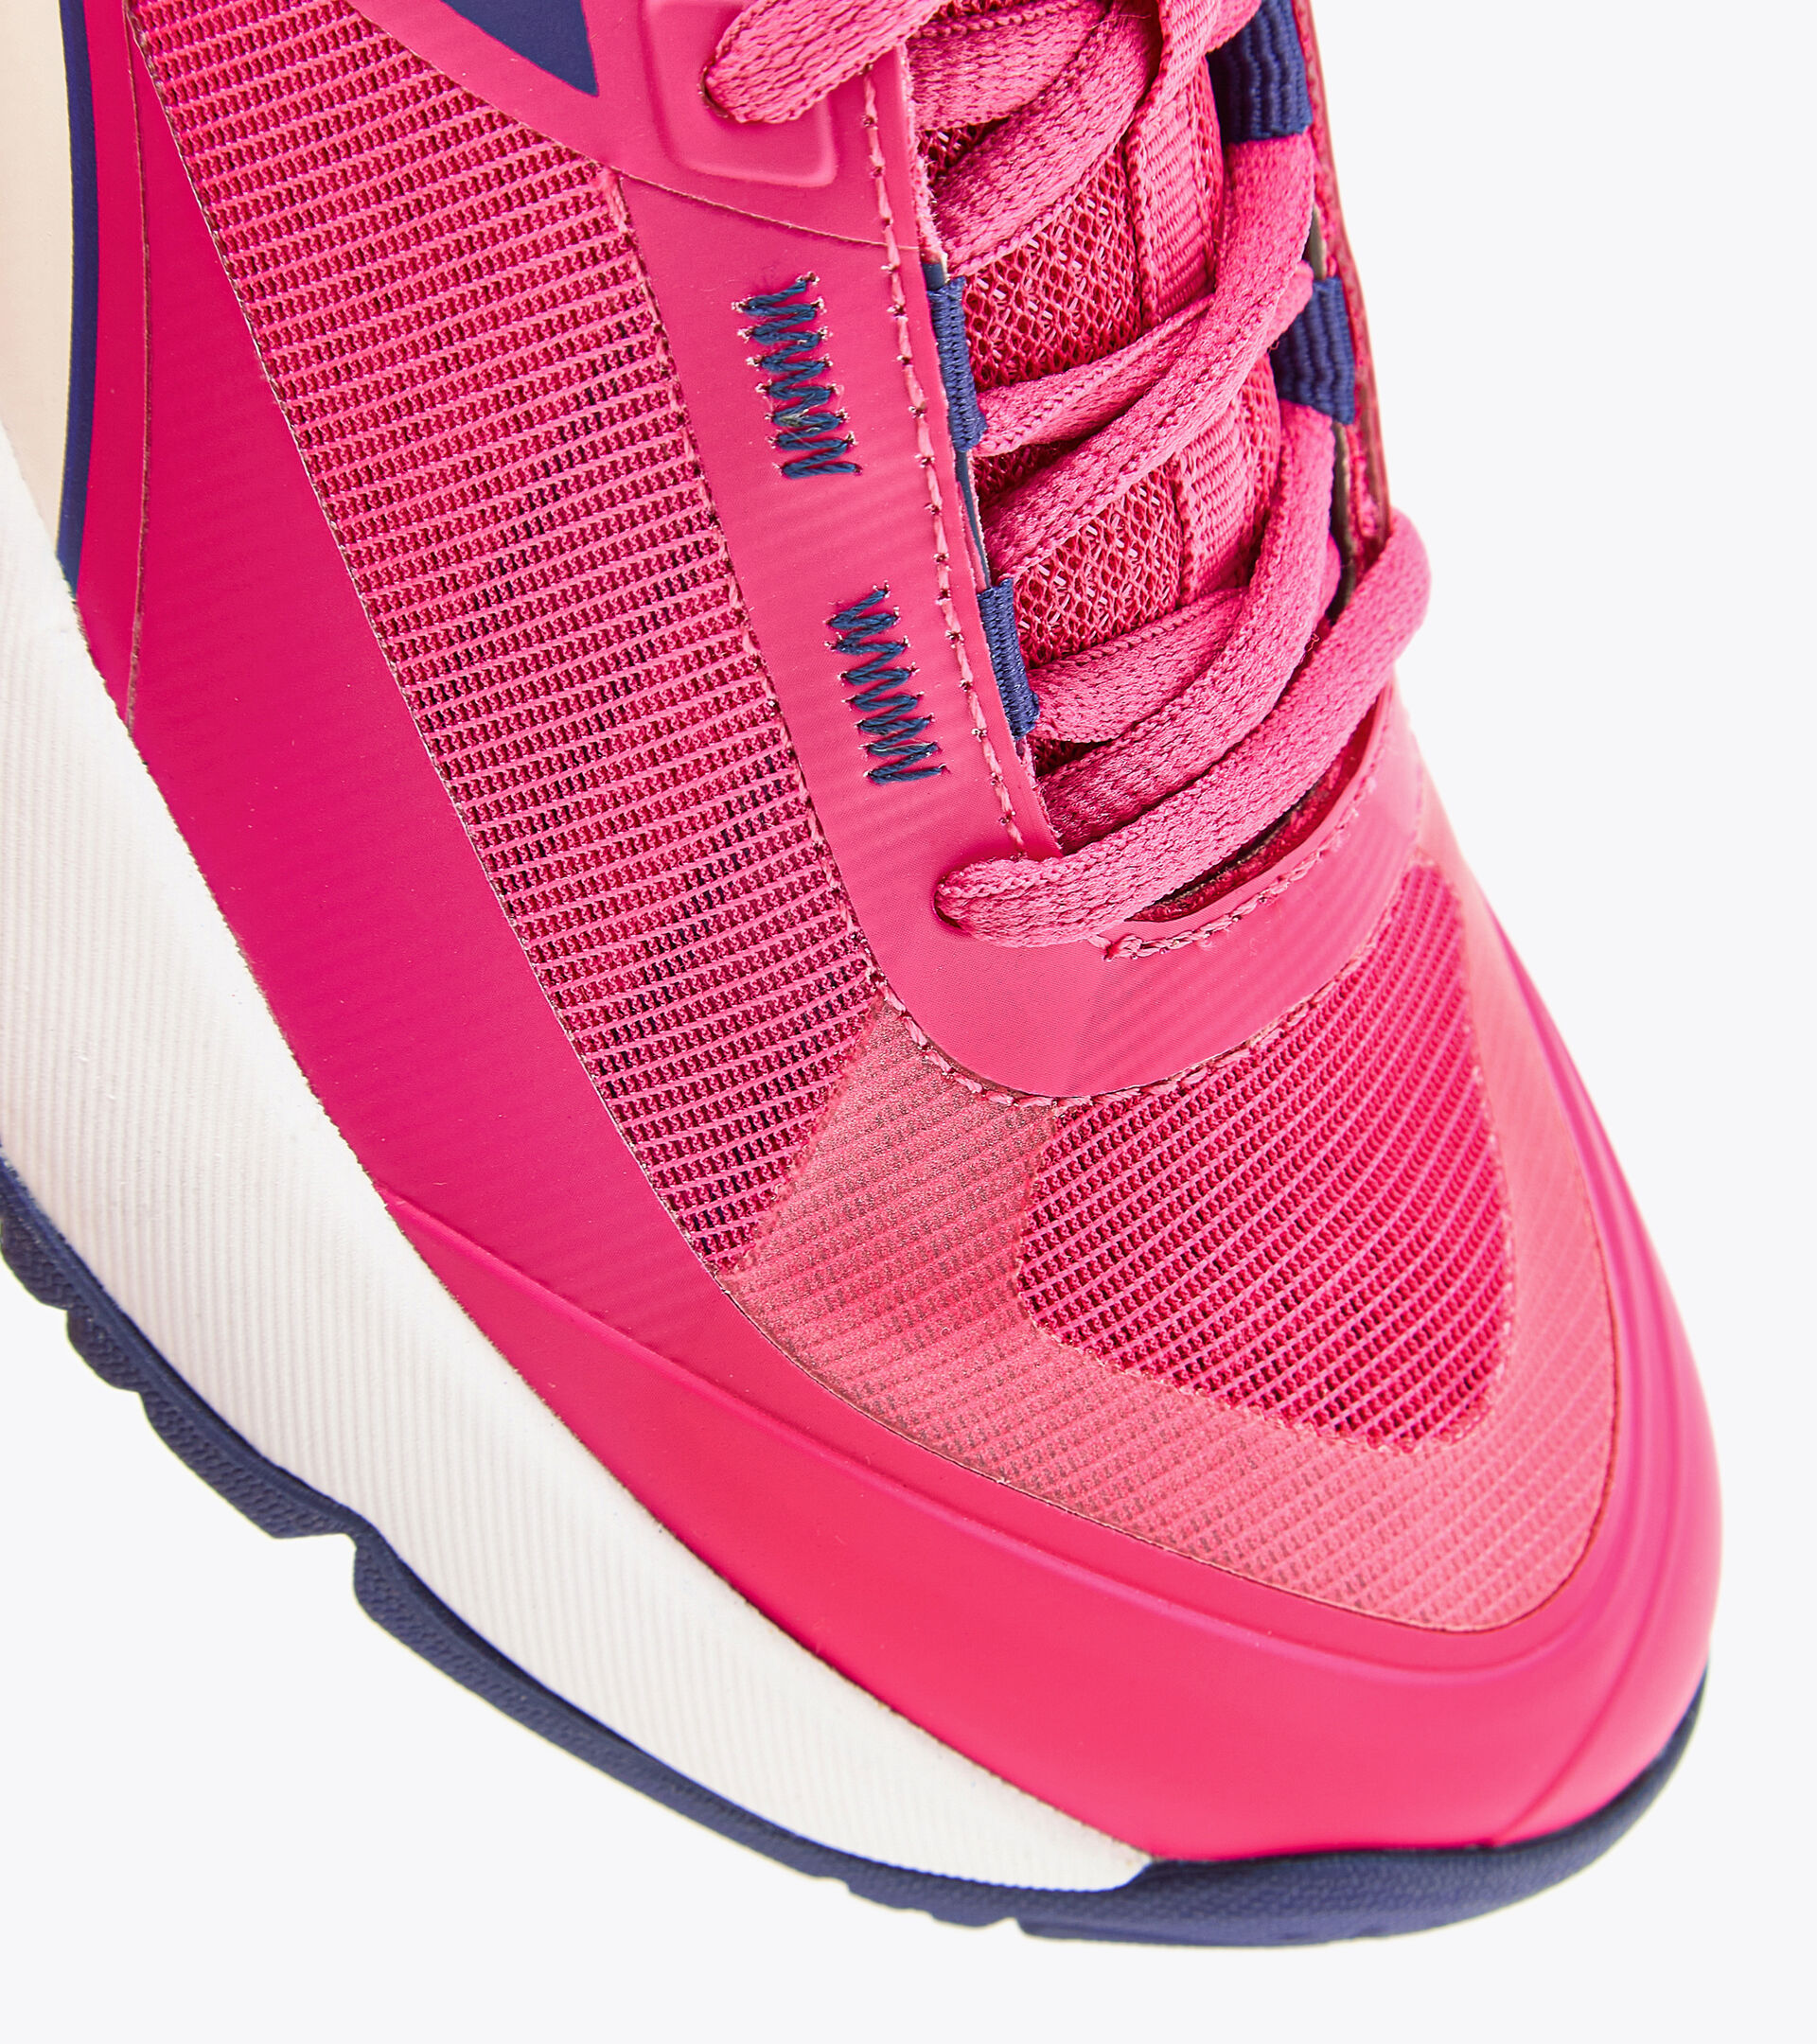 Tennis shoes for hard surfaces or clay courts - Women FINALE W AG PINK YARROW/WHITE/BLUEPRINT - Diadora